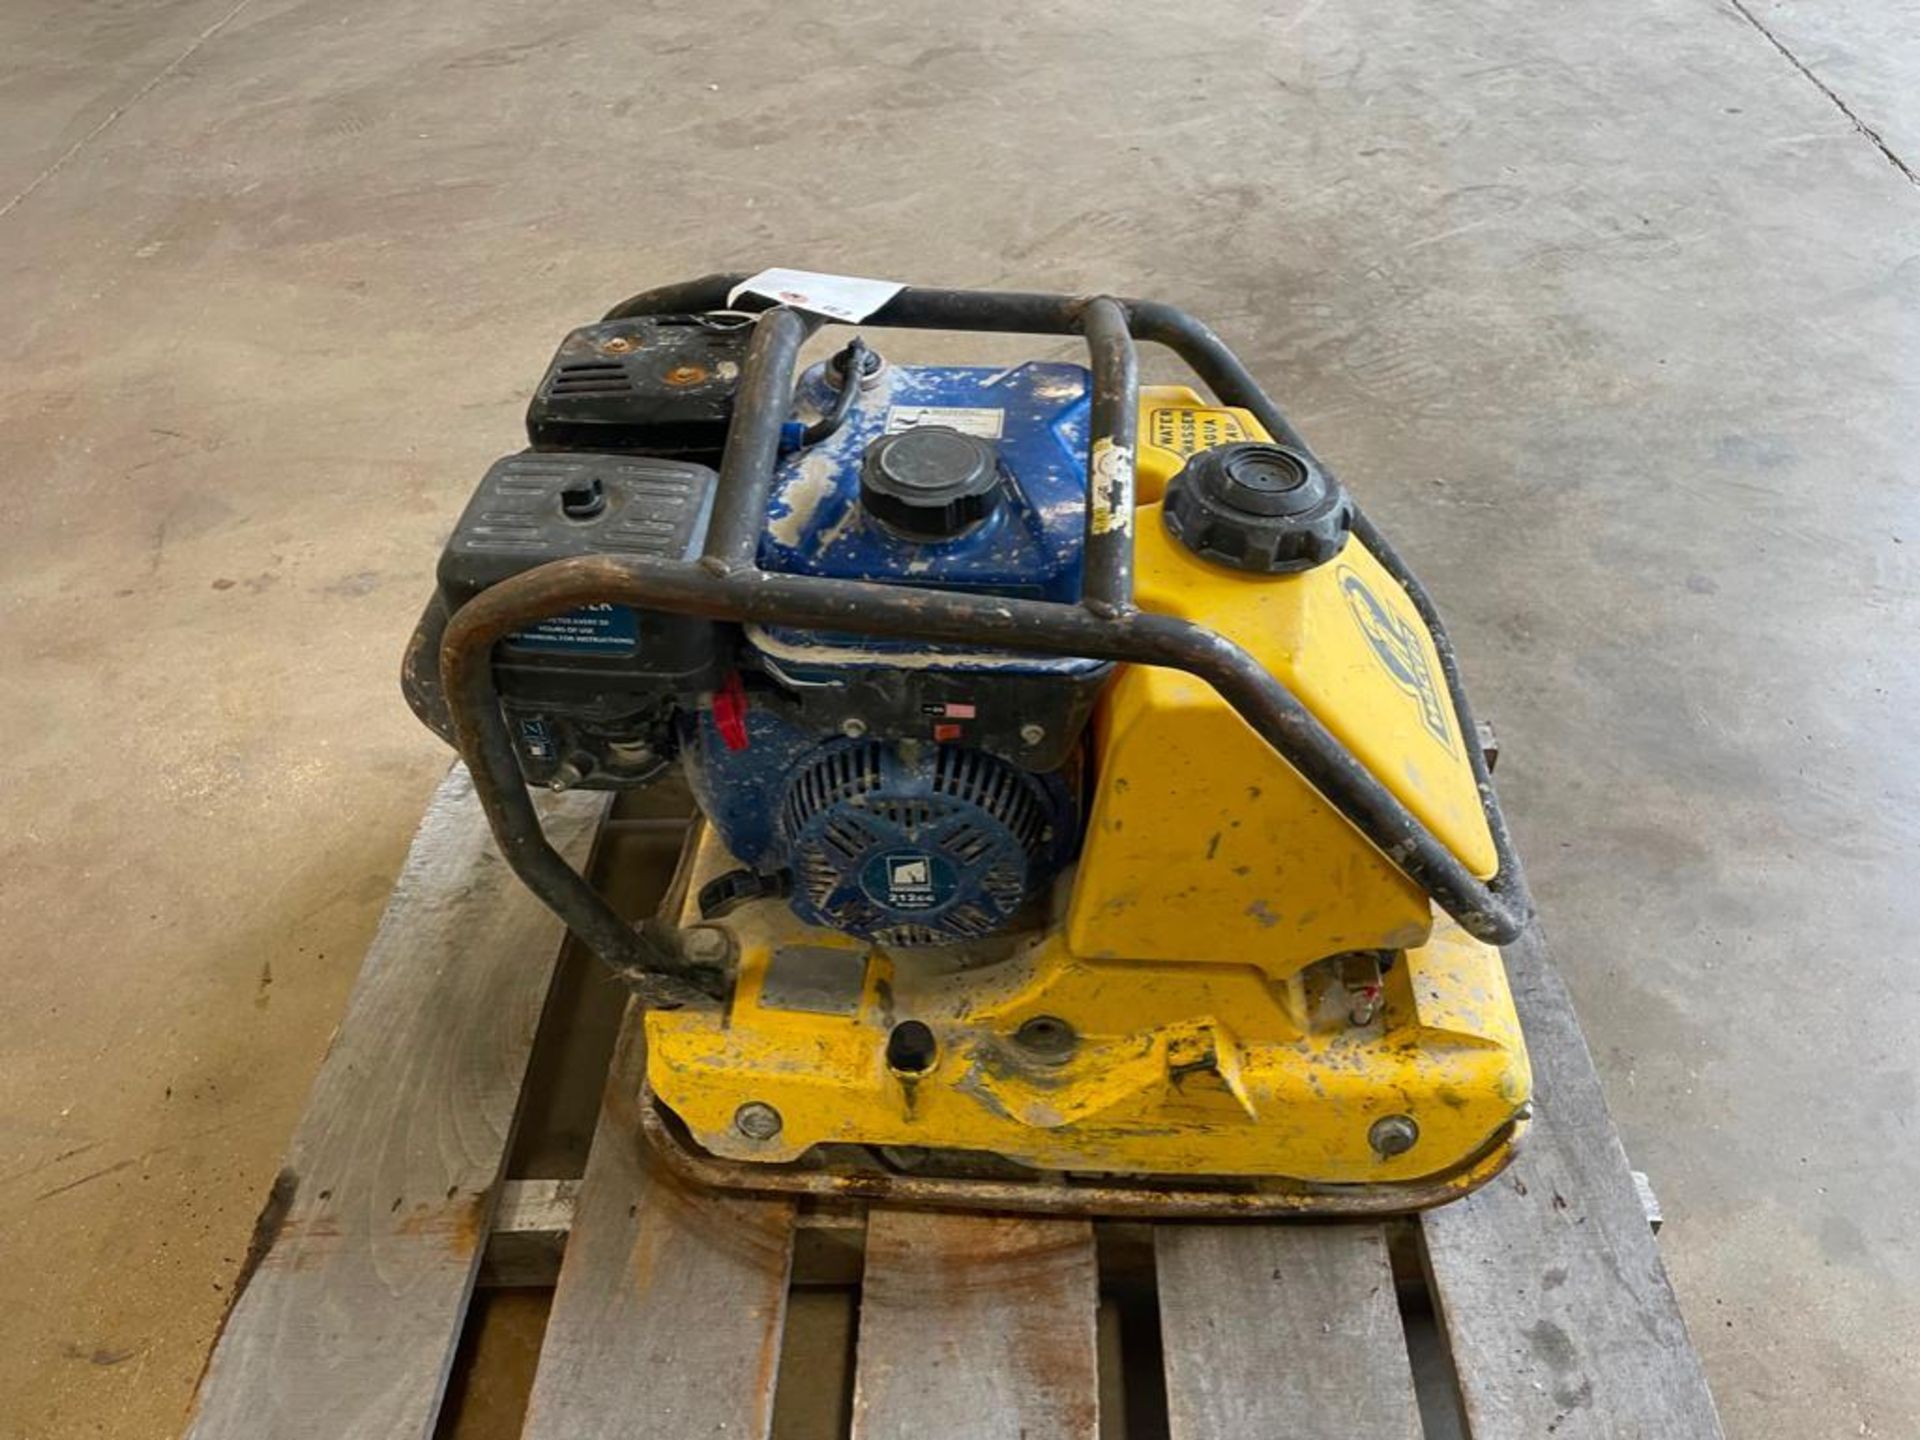 Wacker Plate Compactor with Powerhorse 212 cc Engine.  Located in Hazelwood, MO - Image 3 of 6